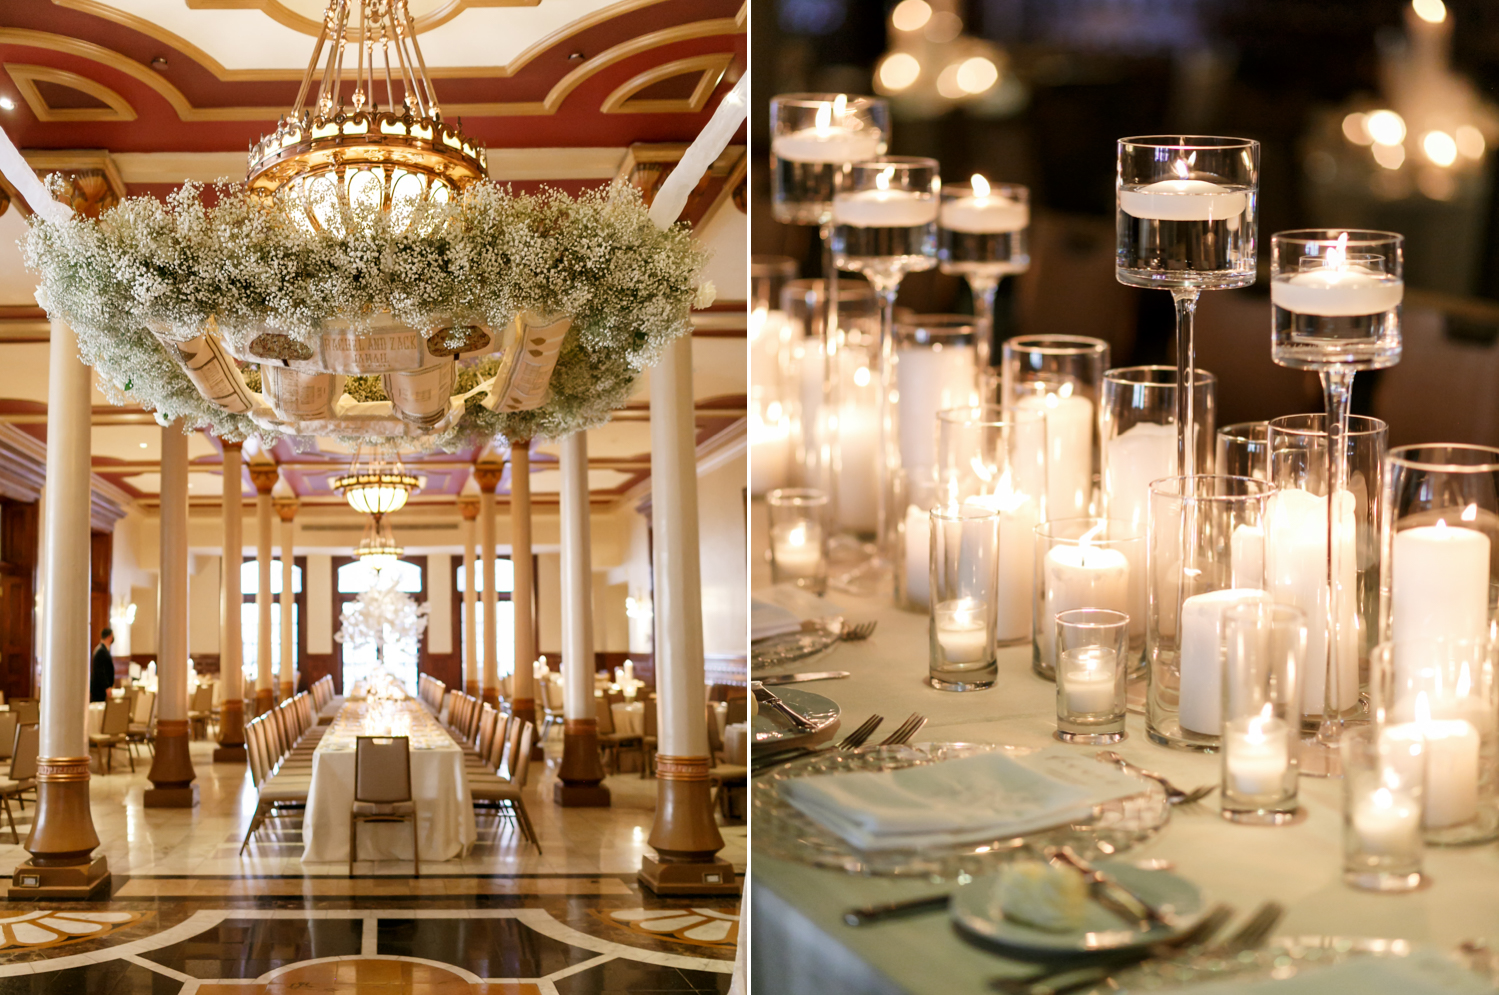 Left: The decorative chuppah adorned with baby's breath flowers and embroidery. Right: the table settings at the reception and white candles in tall glasses adorn the table.